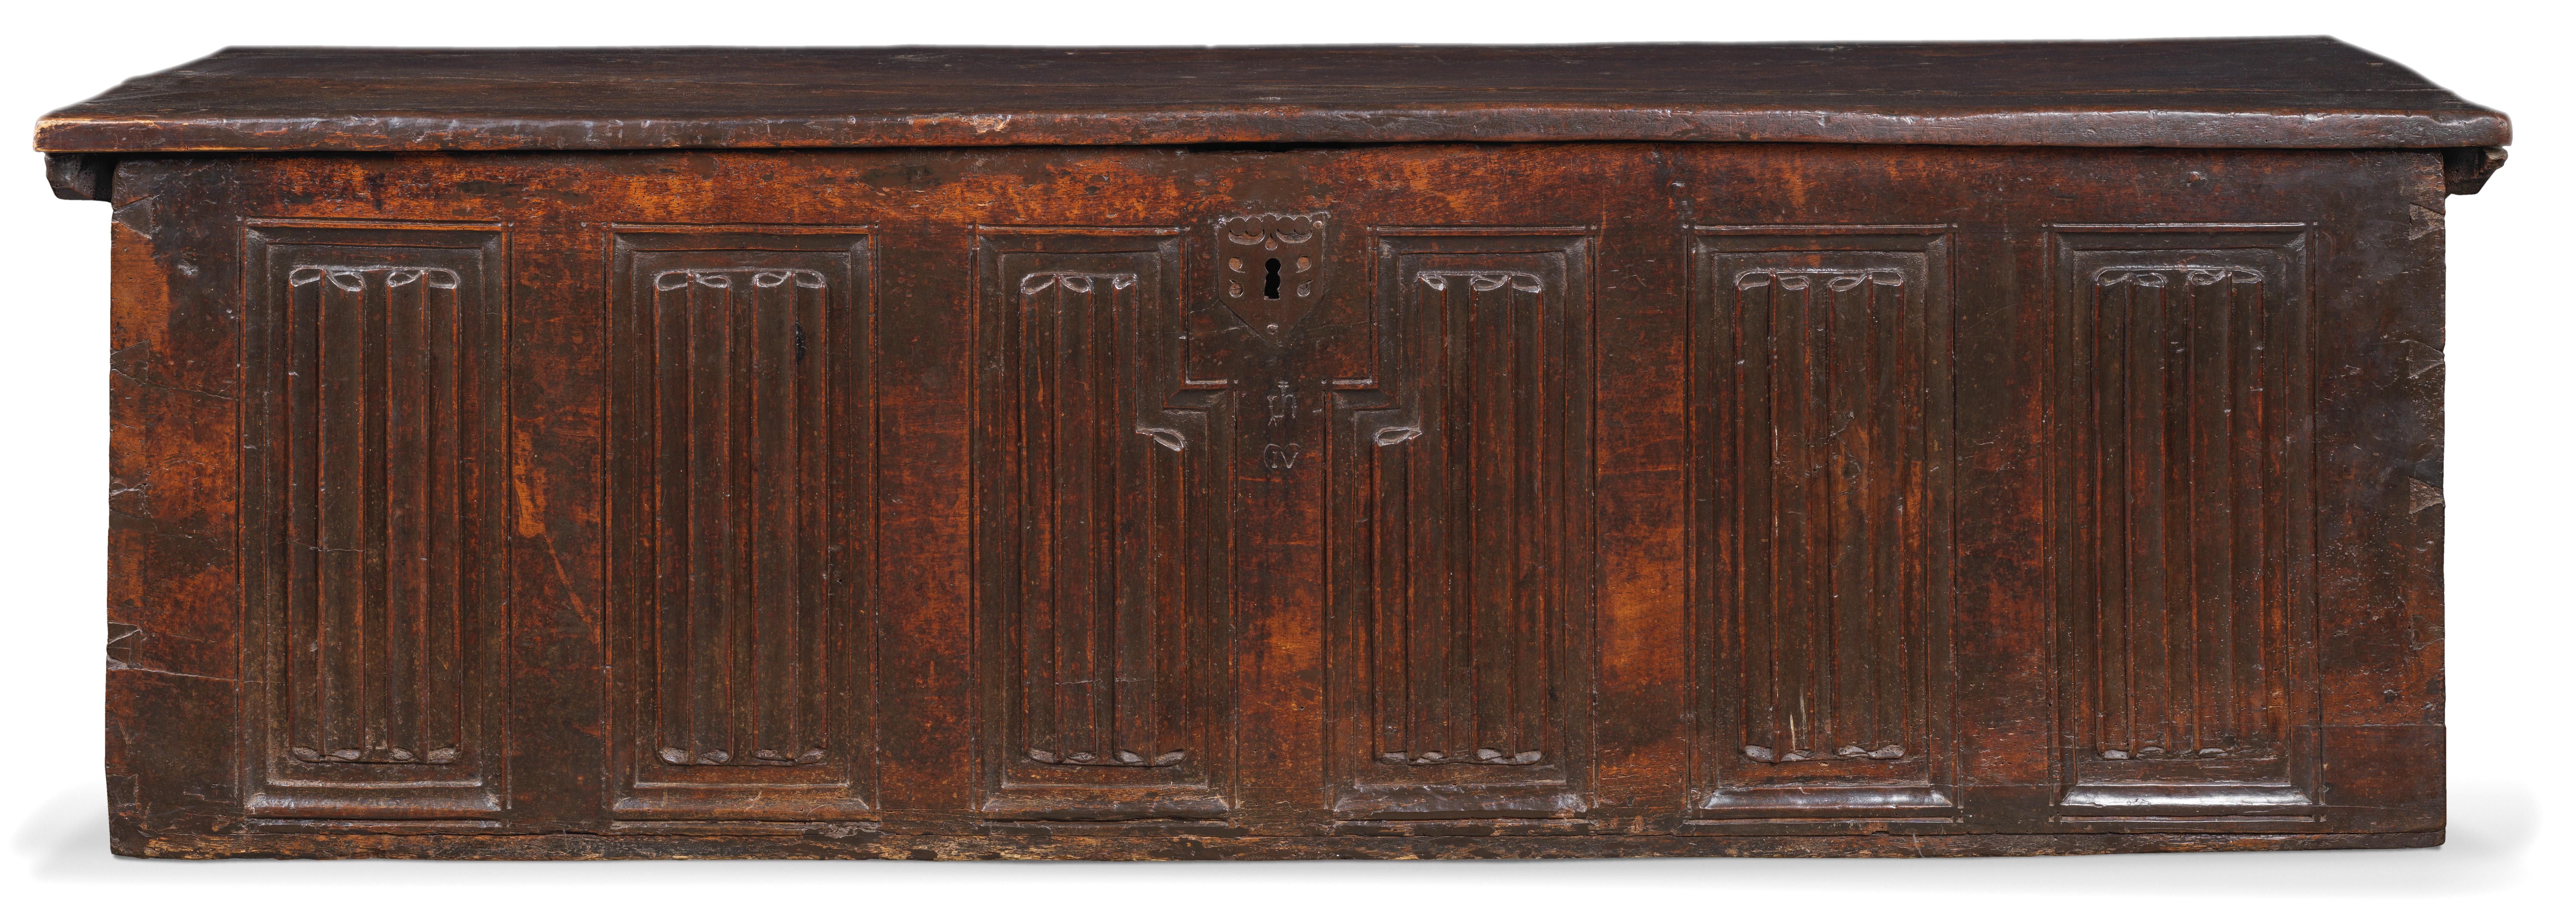 This Gothic walnut chest, with an exceptional patina, is a good example of furniture intended to be transported during the frequent journeys made by quality people in medieval times.
Very simple in appearance, this six-ply napkin chest is actually